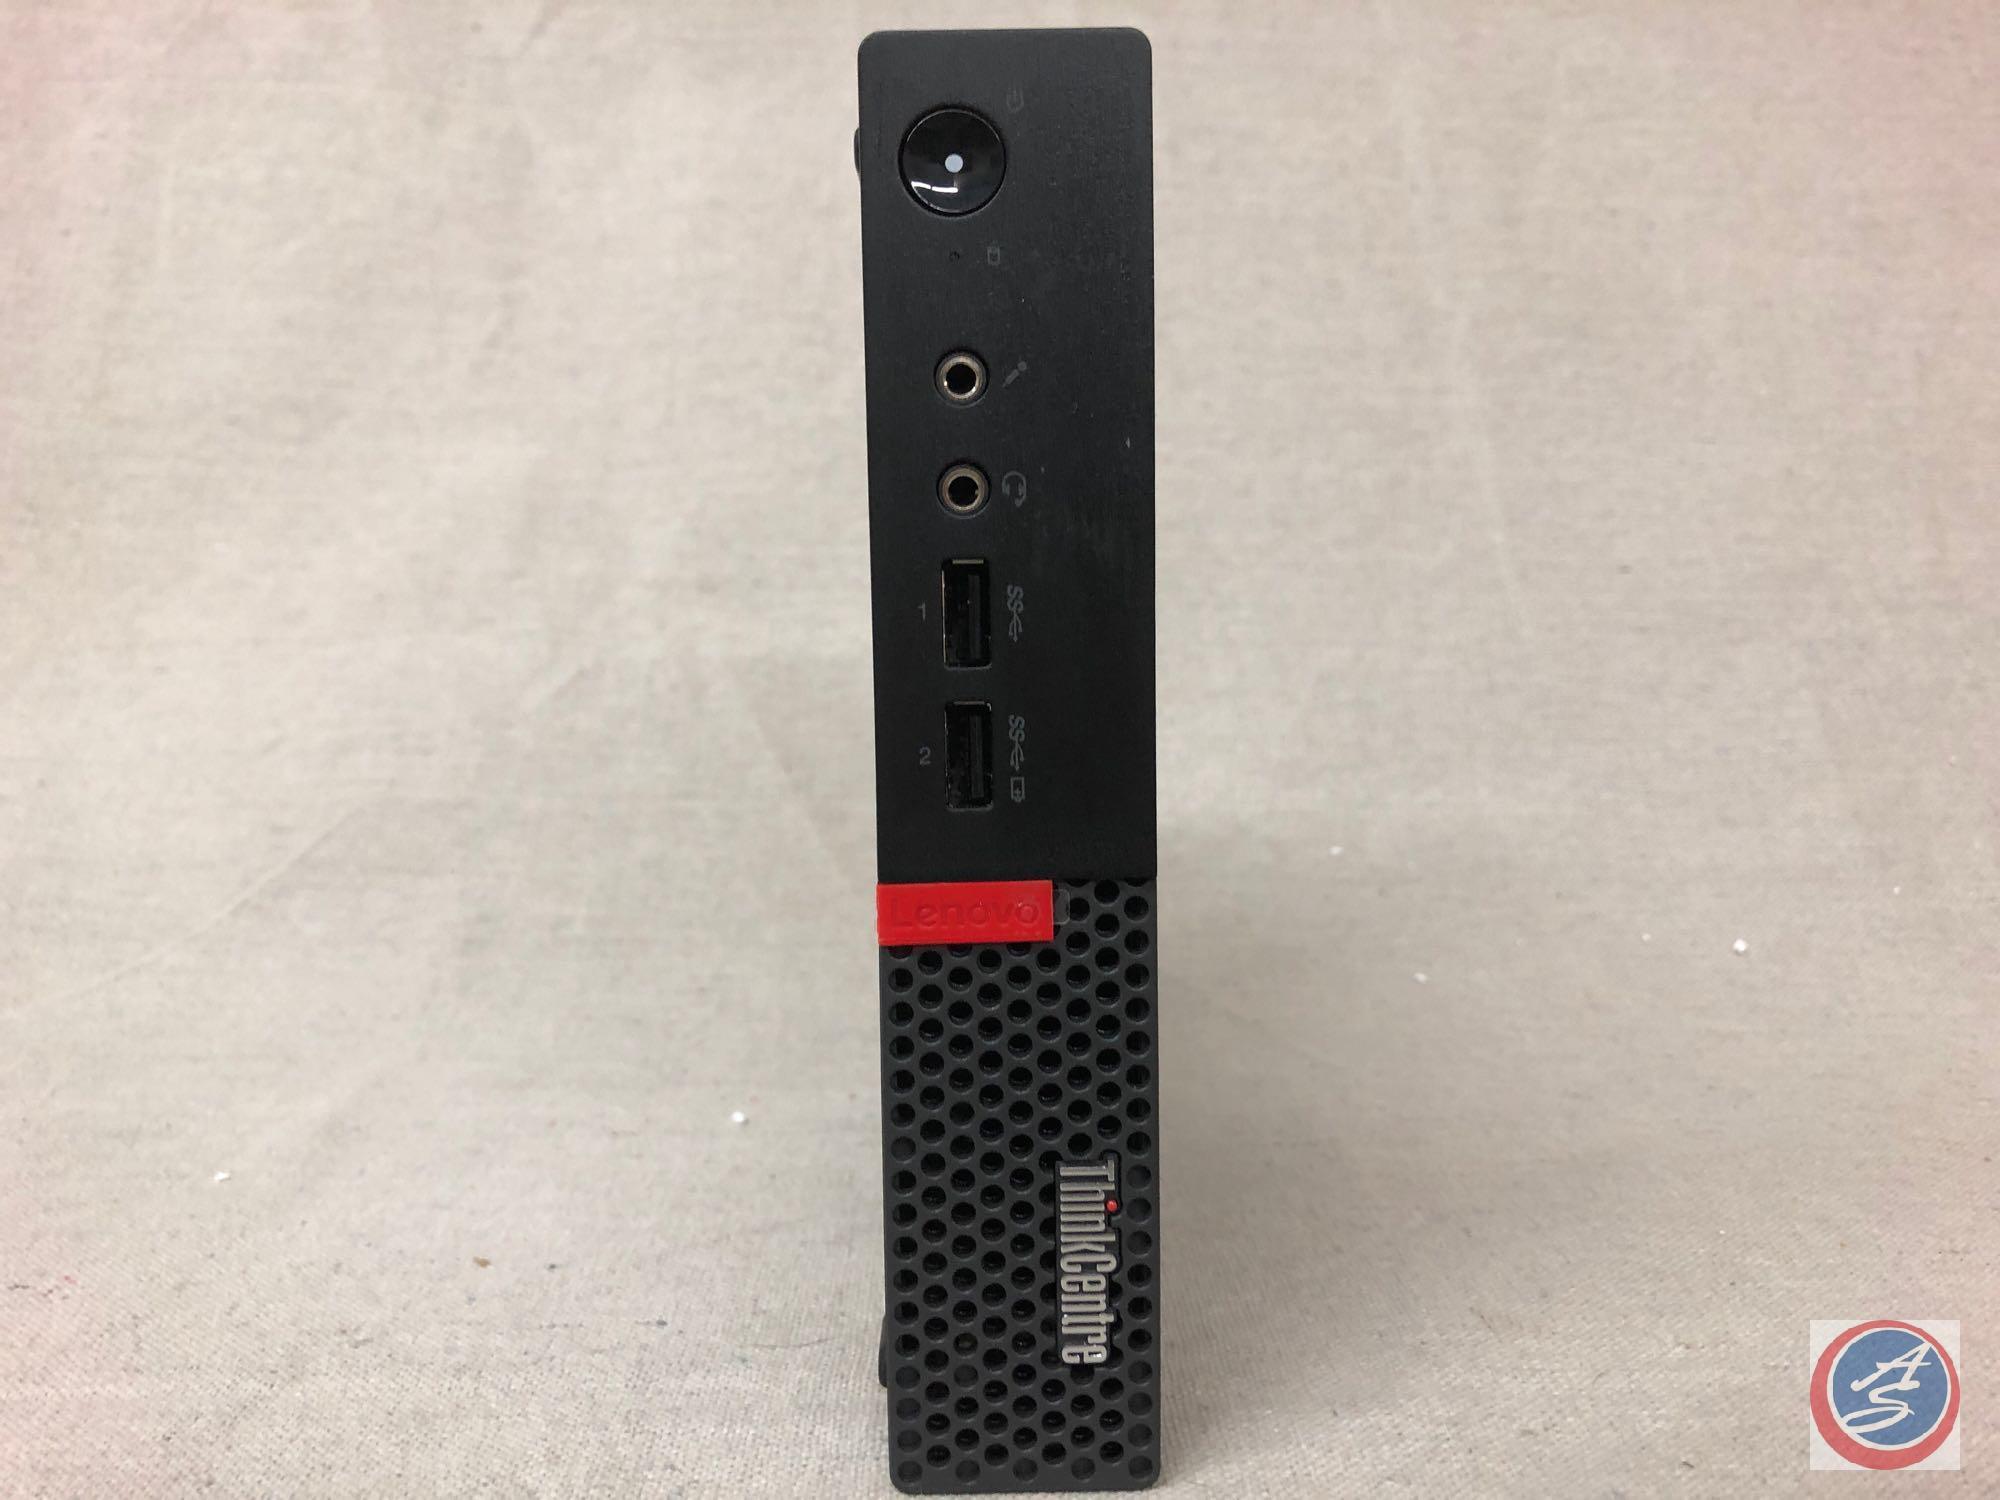 Lenovo Thinkcenter M710q {{INCLUDES ONE POWER CORD, ONE MOUSE, ONE KEYBOARD}}